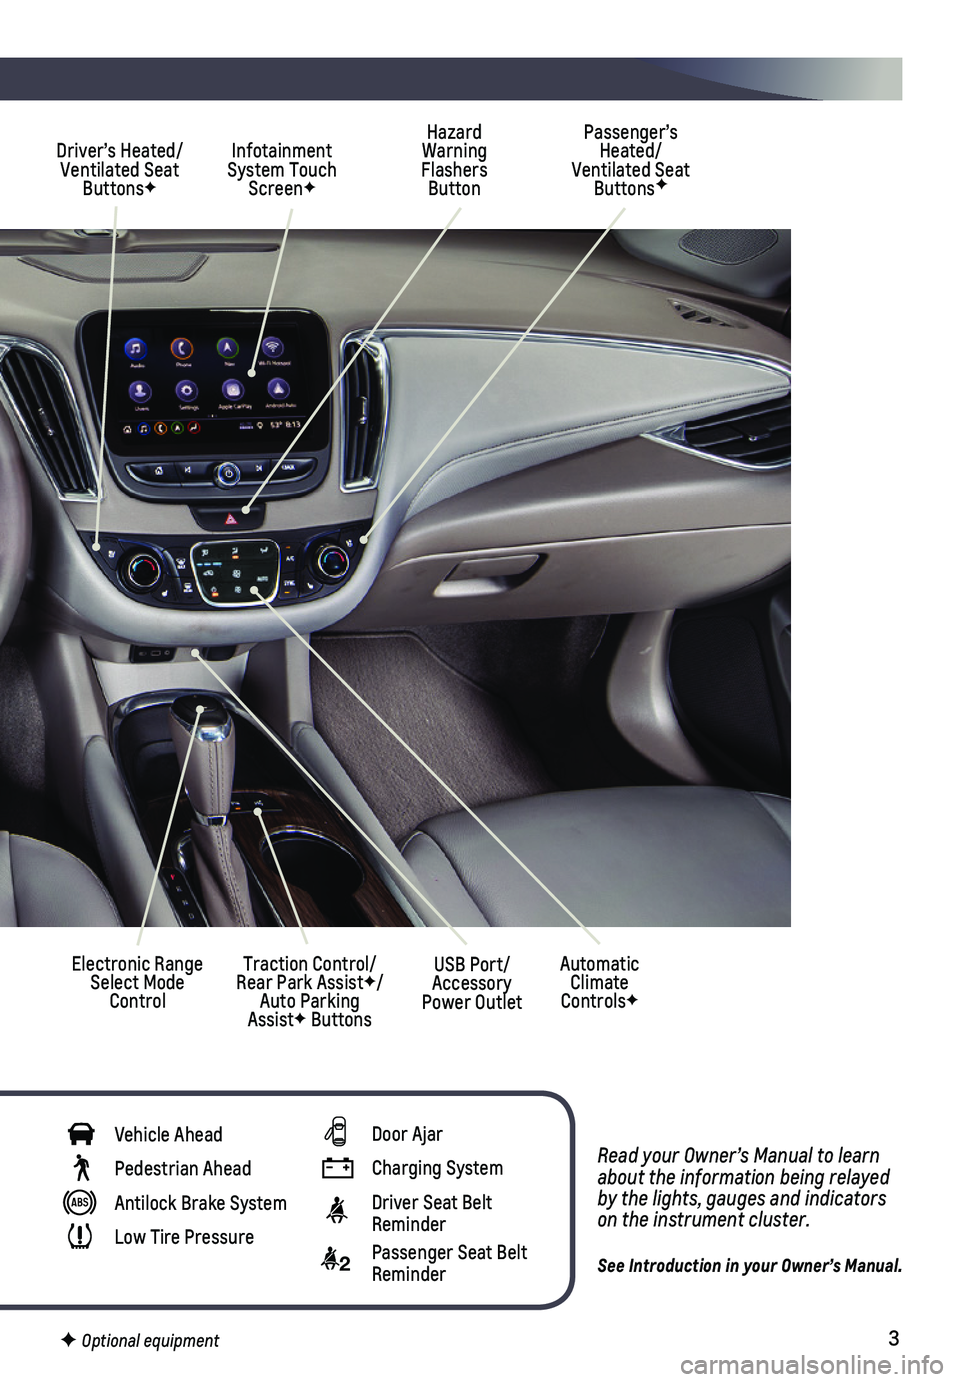 CHEVROLET MALIBU 2021  Get To Know Guide 3
Read your Owner’s Manual to learn about the information being relayed by the lights, gauges and indicators on the instrument cluster.
See Introduction in your Owner’s Manual.
Hazard Warning Flas